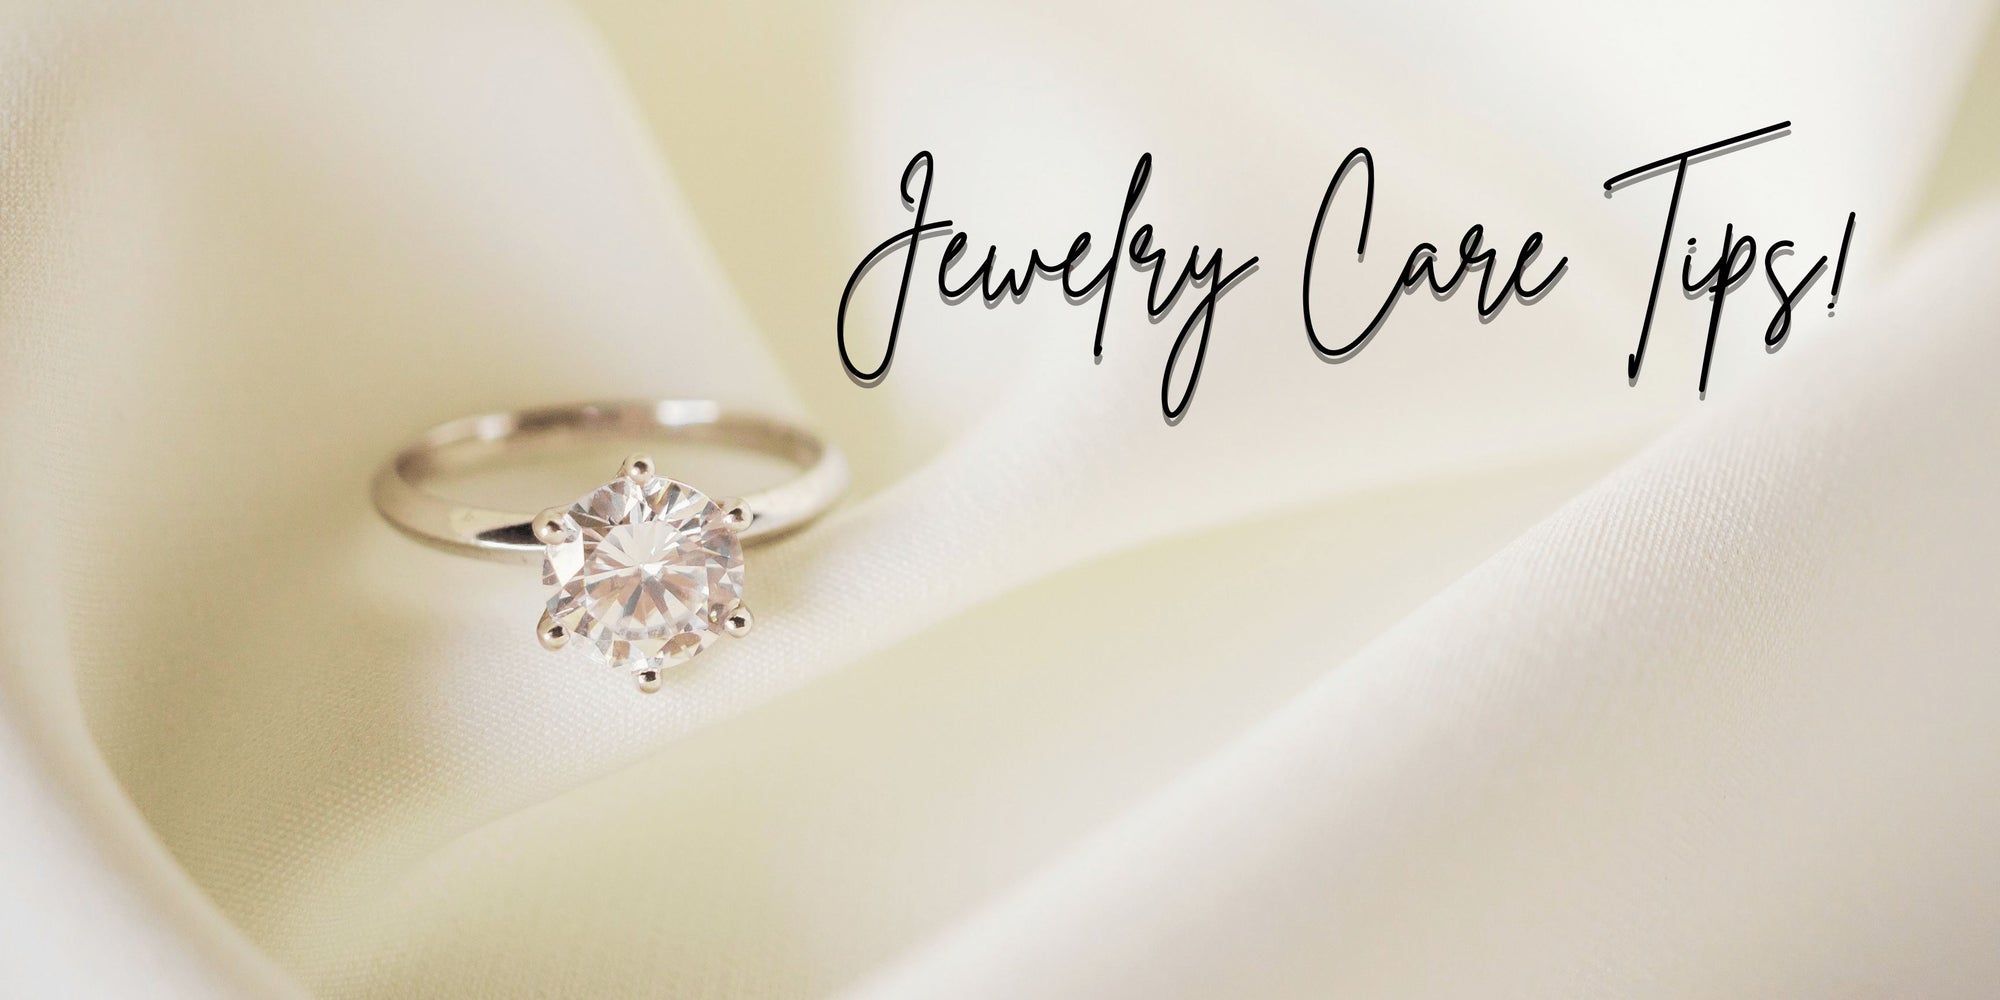 Jewelry Care Tips!